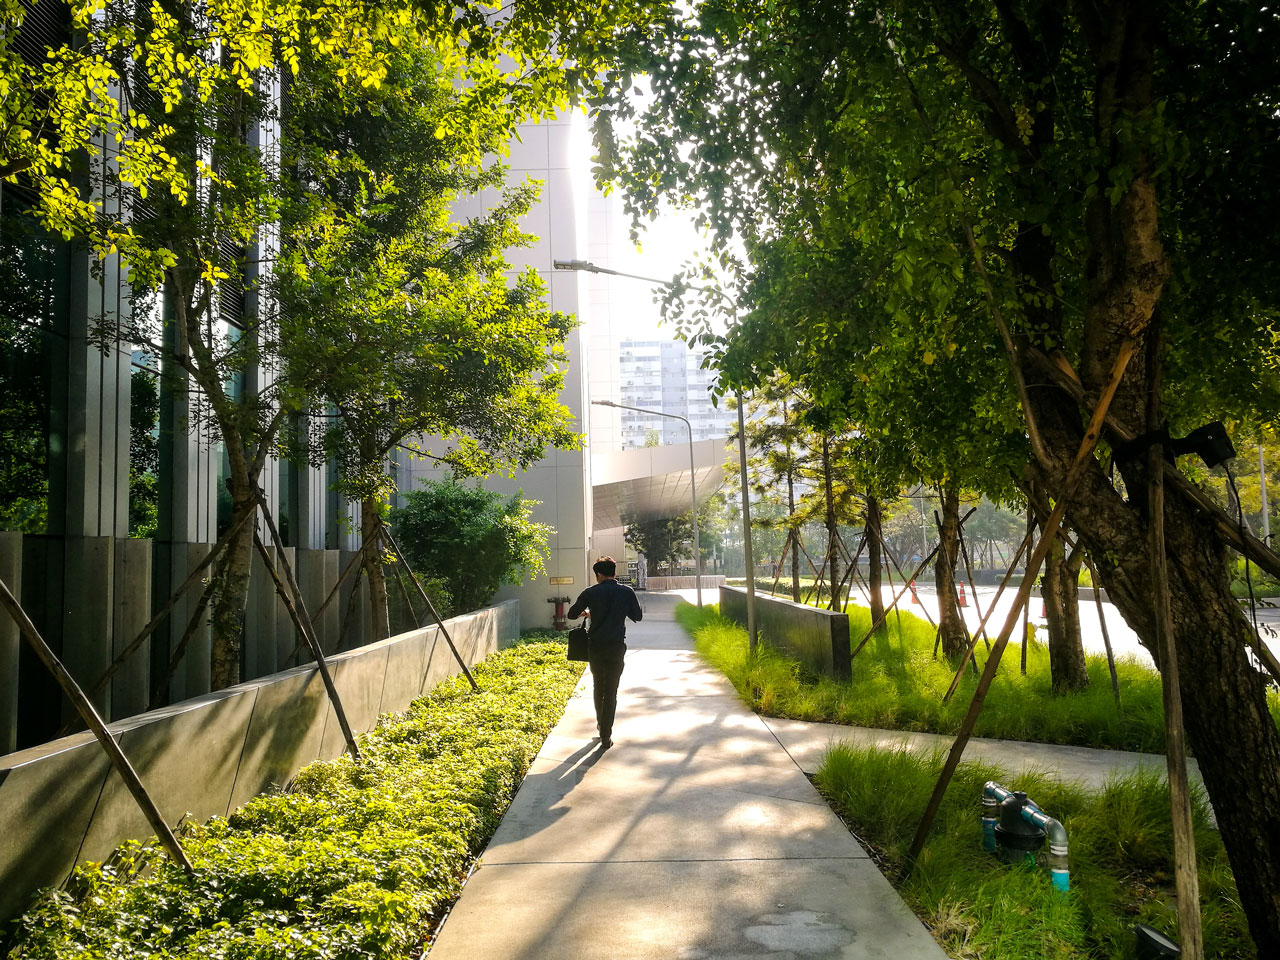 Walk in city surrounded by trees and grass